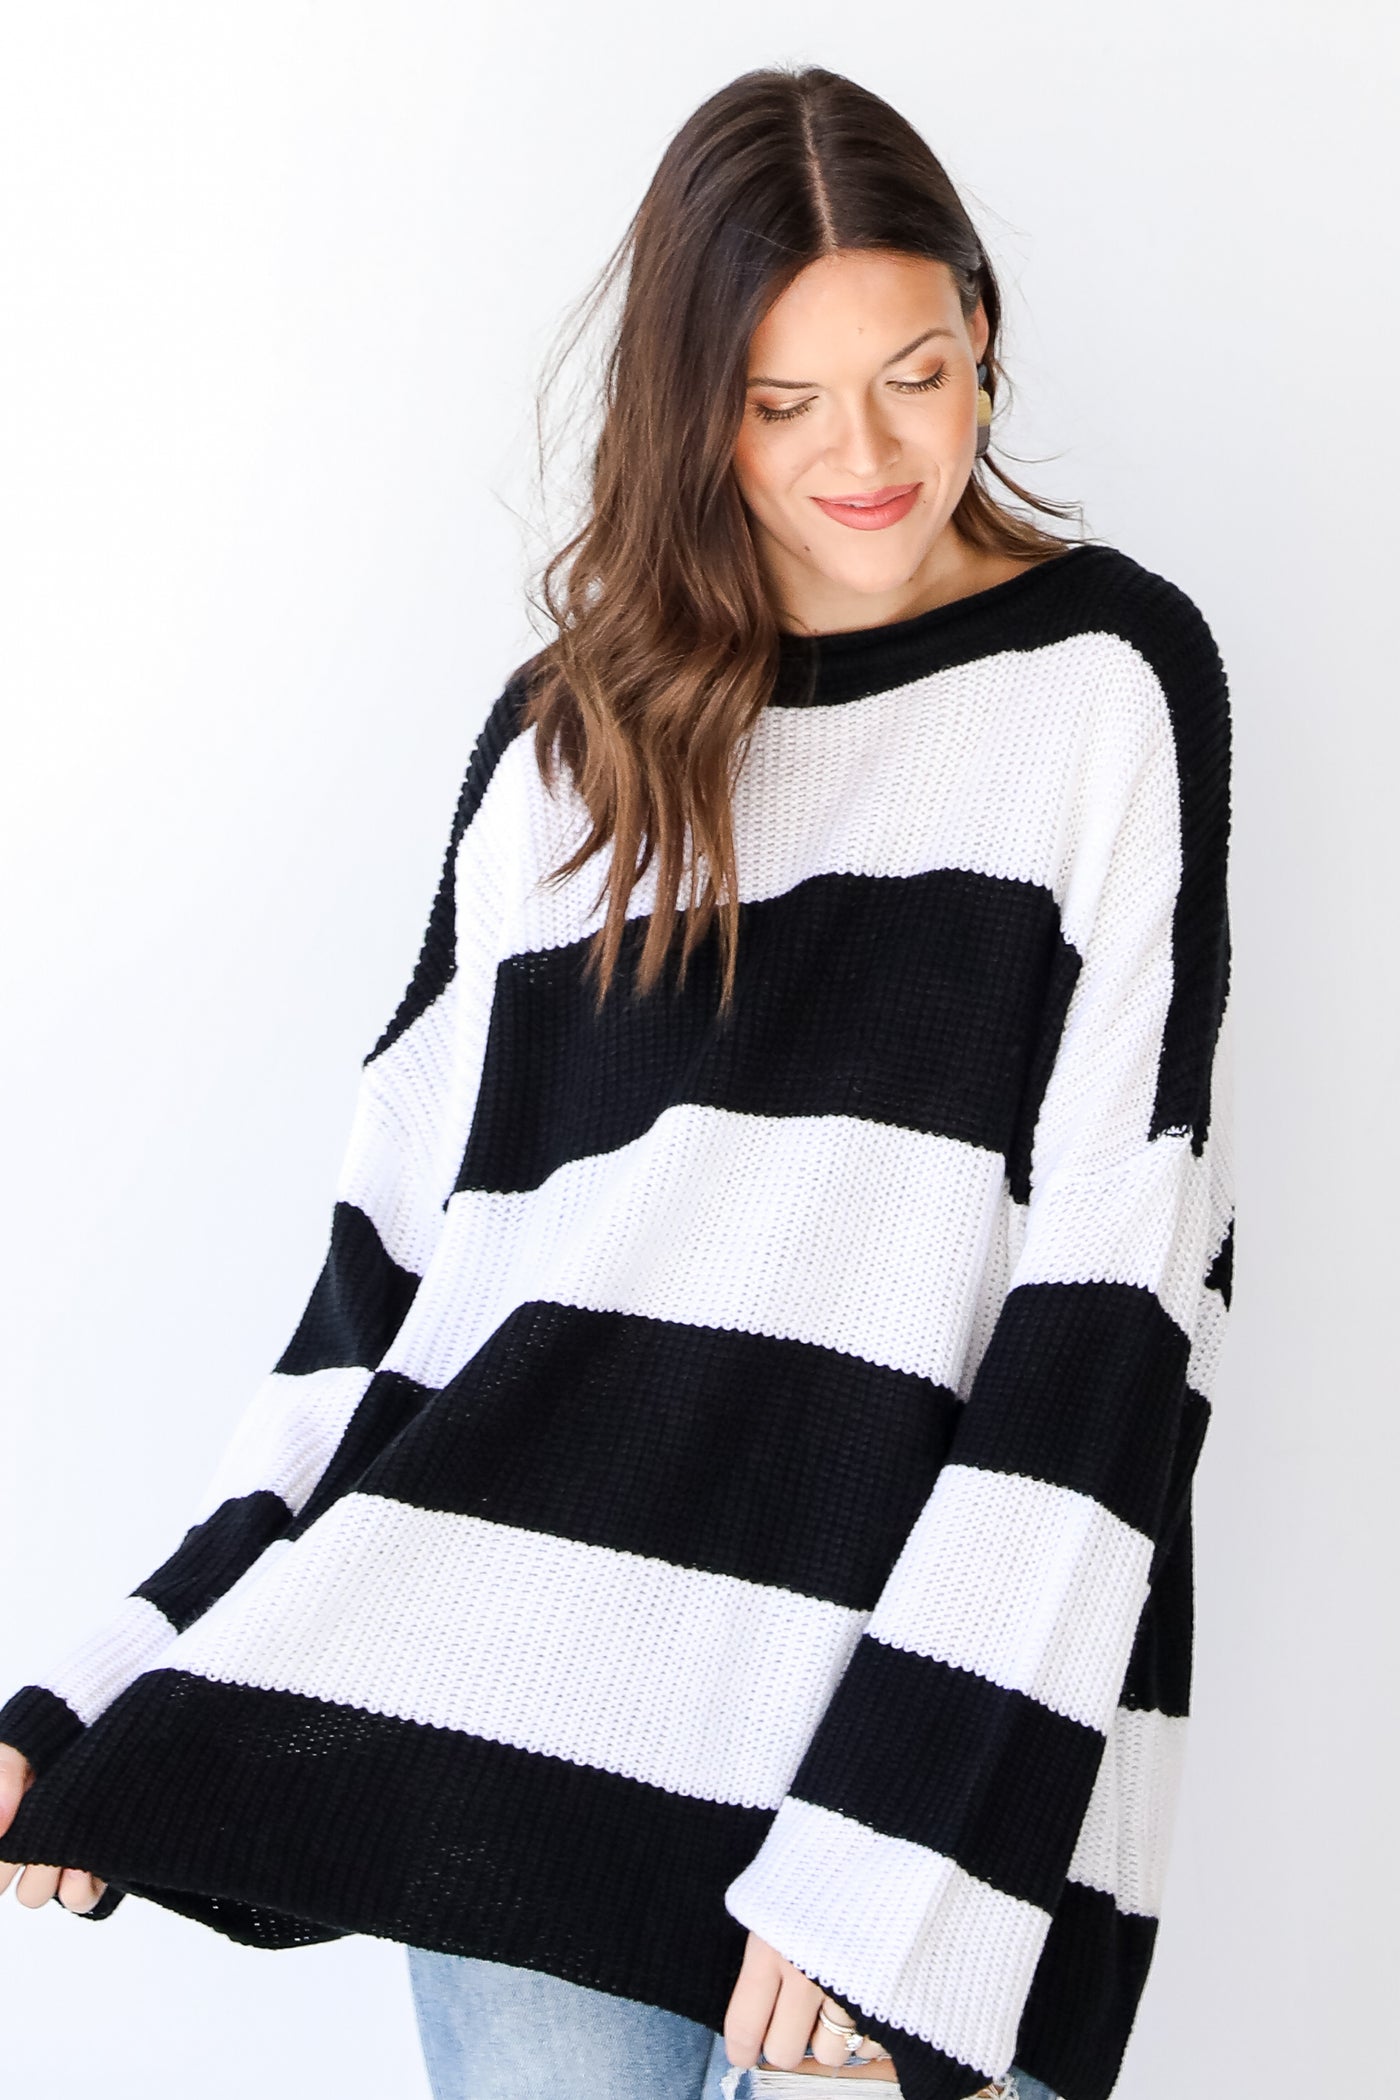 Striped Sweater front view